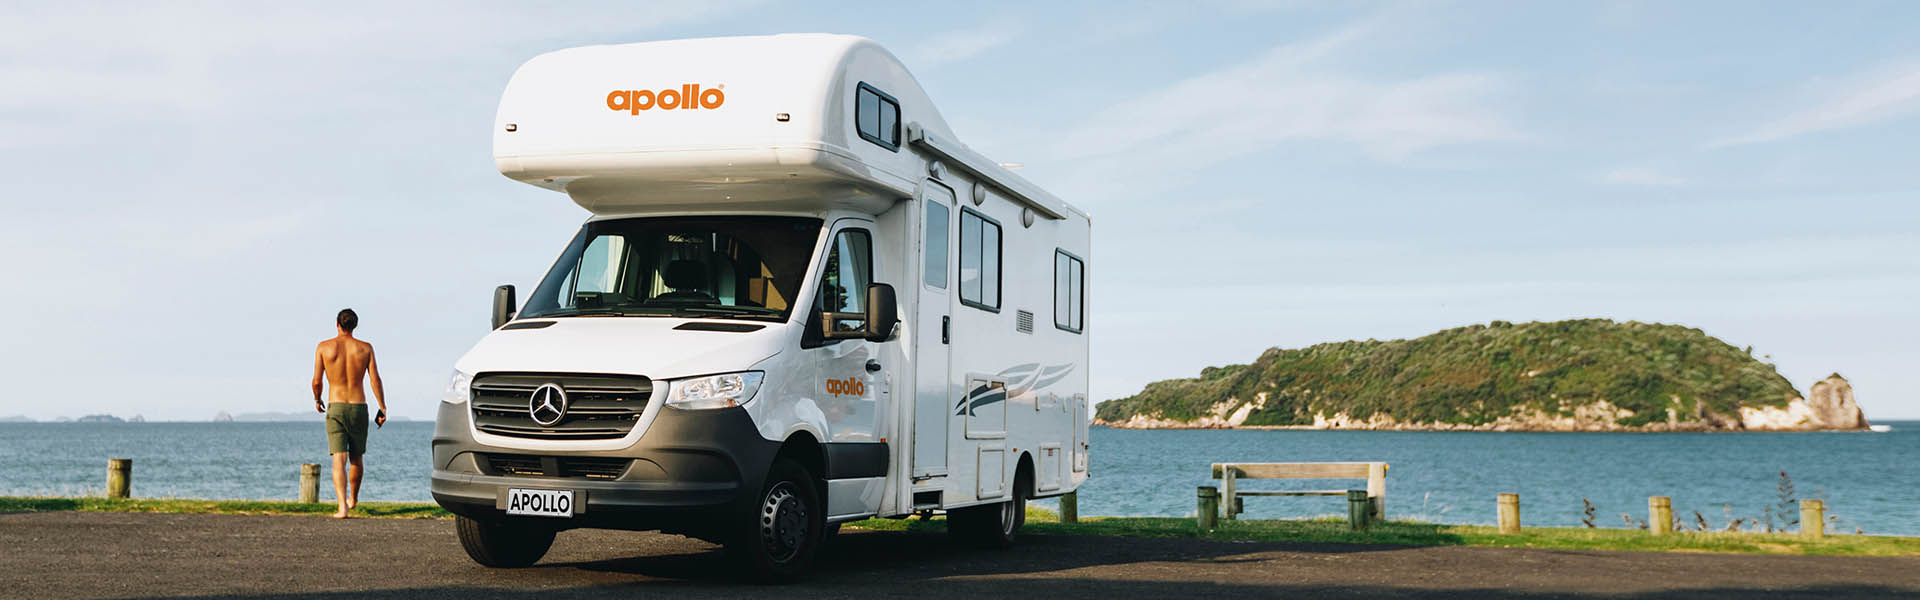 Apollo rental motorhome in front of beach